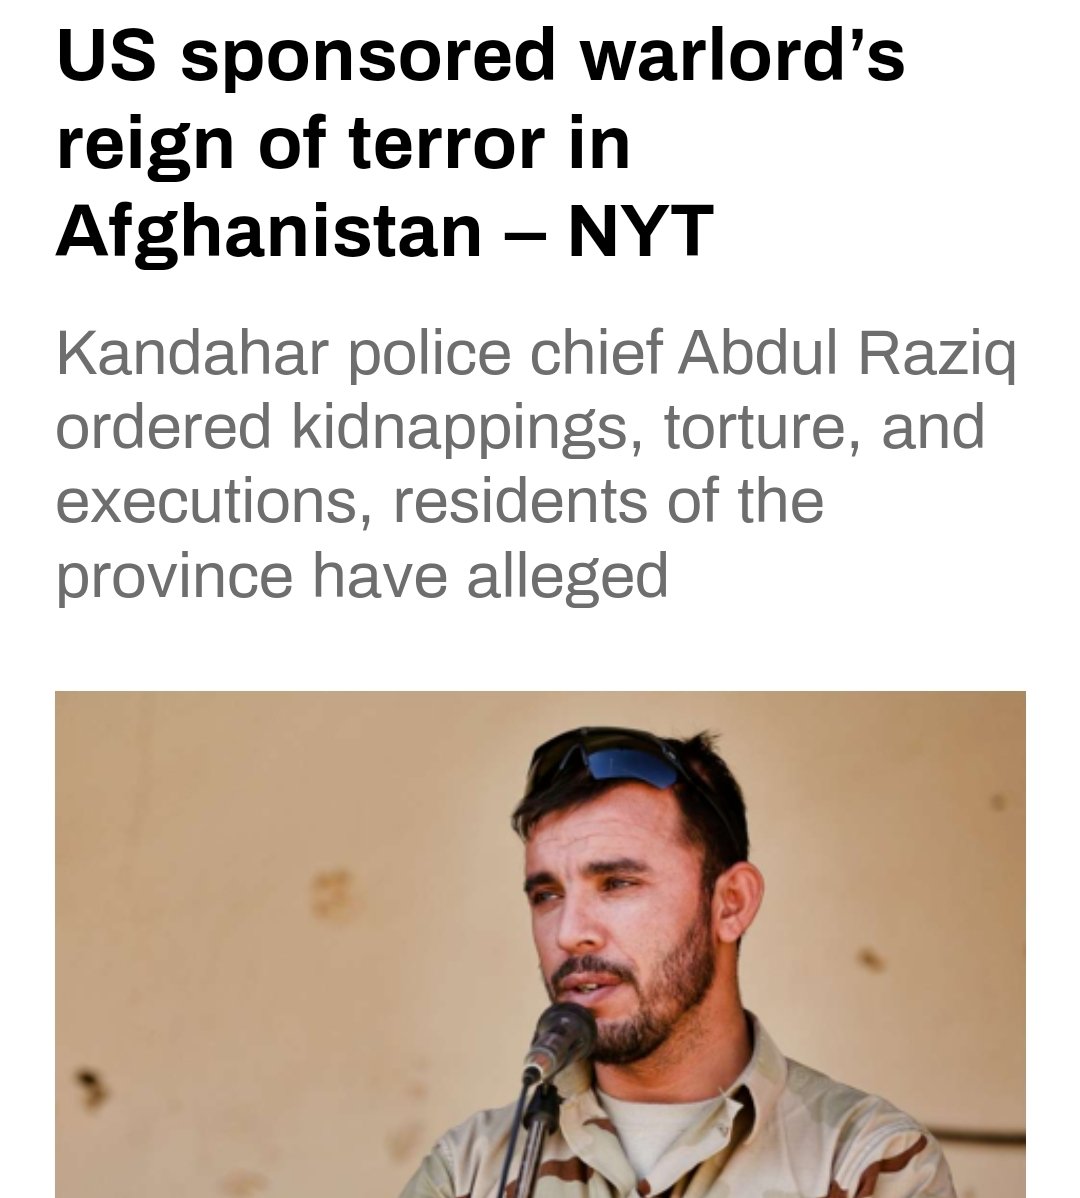 War media @nytimes finally admits: while claiming to protect the #Afghan people from the Taliban, the US occupation propped up vicious warlords like Abdul Raziq. rt.com/news/598062-af…